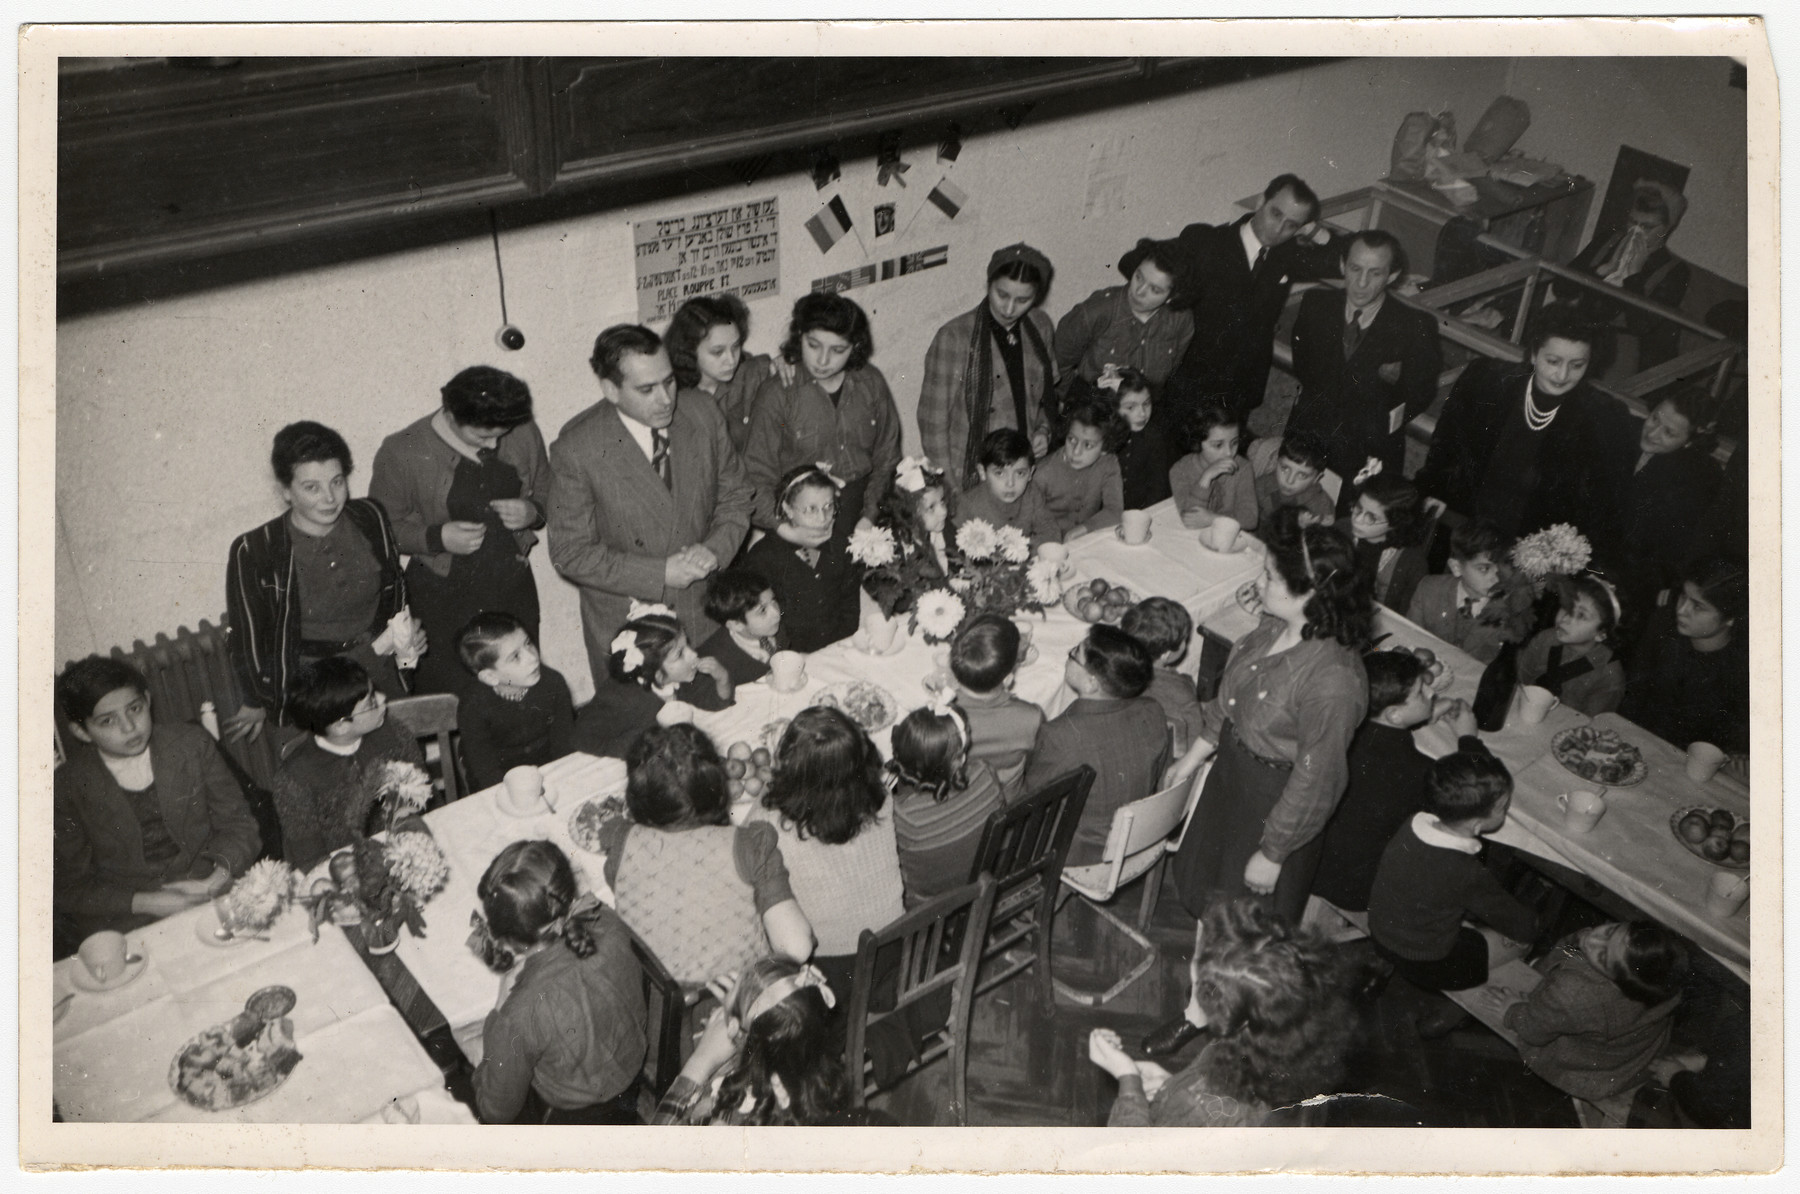 Children in a postwar children's home gather around long tables set with fruit and decorated with flowers.  Hebrew signs hang on the walls.

Among those pictured is Fela Perleman (standing second from the left).